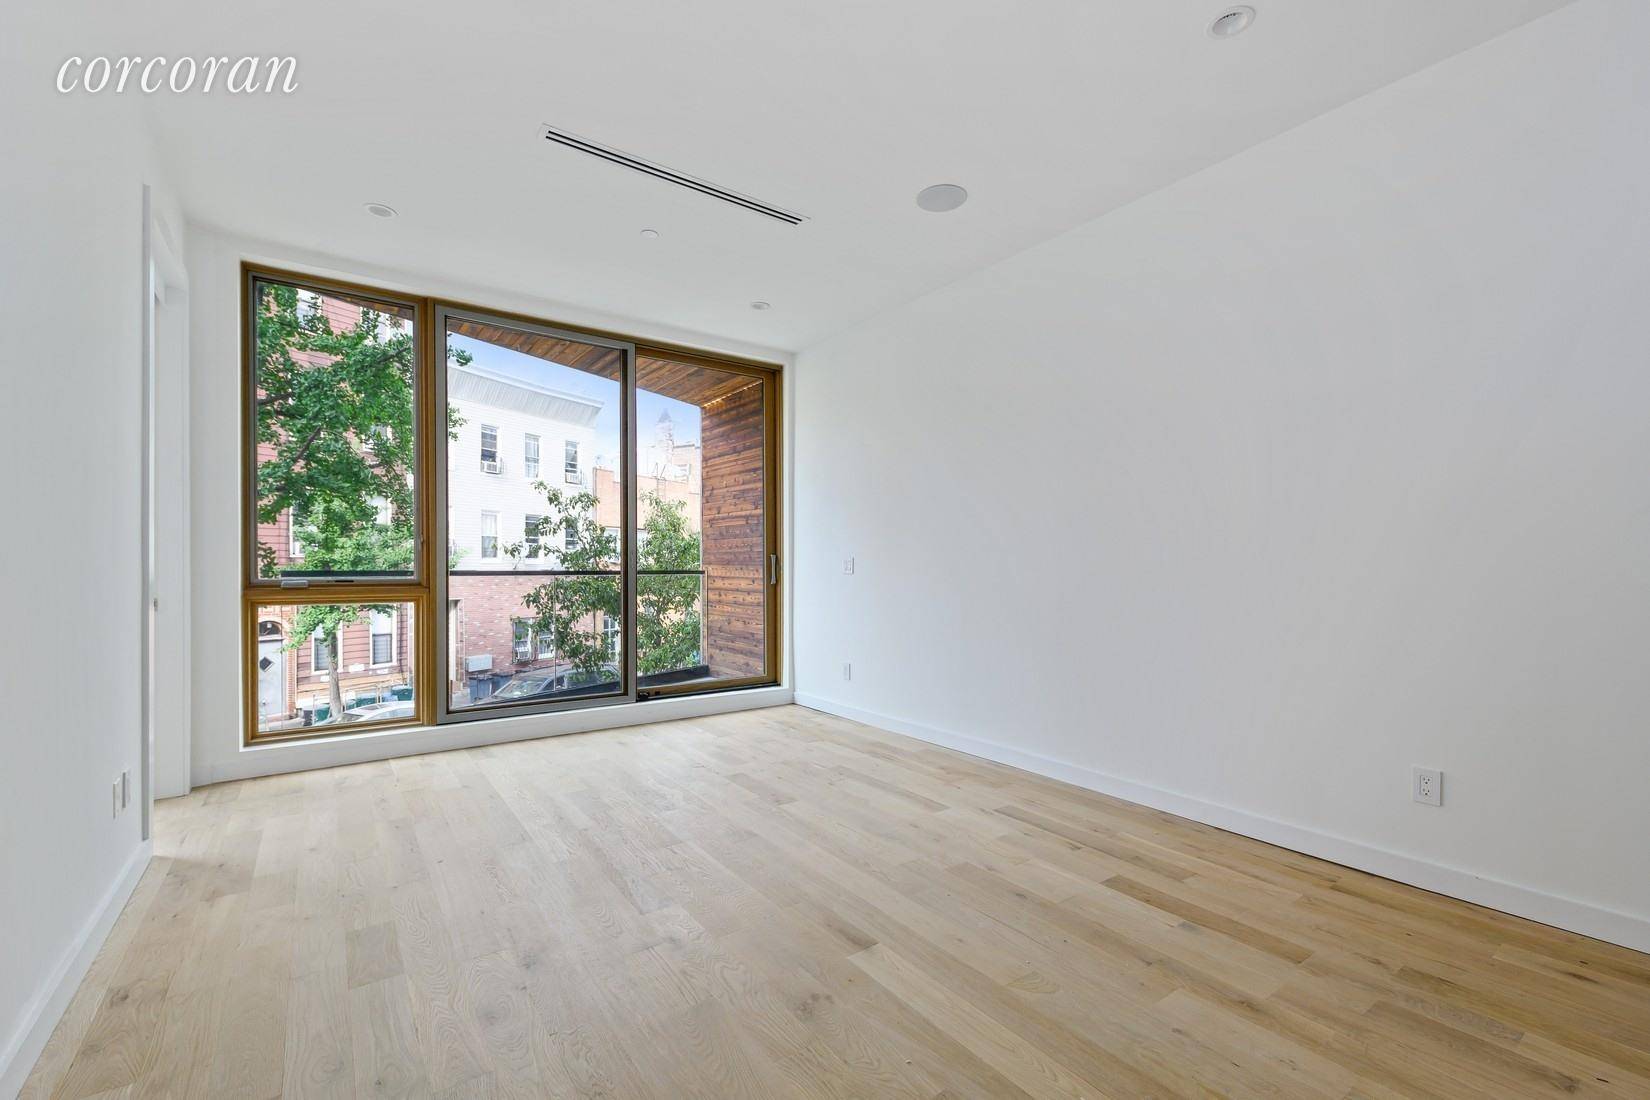 AVAILABLE FOR IMMEDIATE OCCUPANCY 168 Evergreen is an 8 unit condominium, an architectural gem masterfully designed to reflect the artistic flair of this fashionable Bushwick neighborhood with its unequaled quality ...